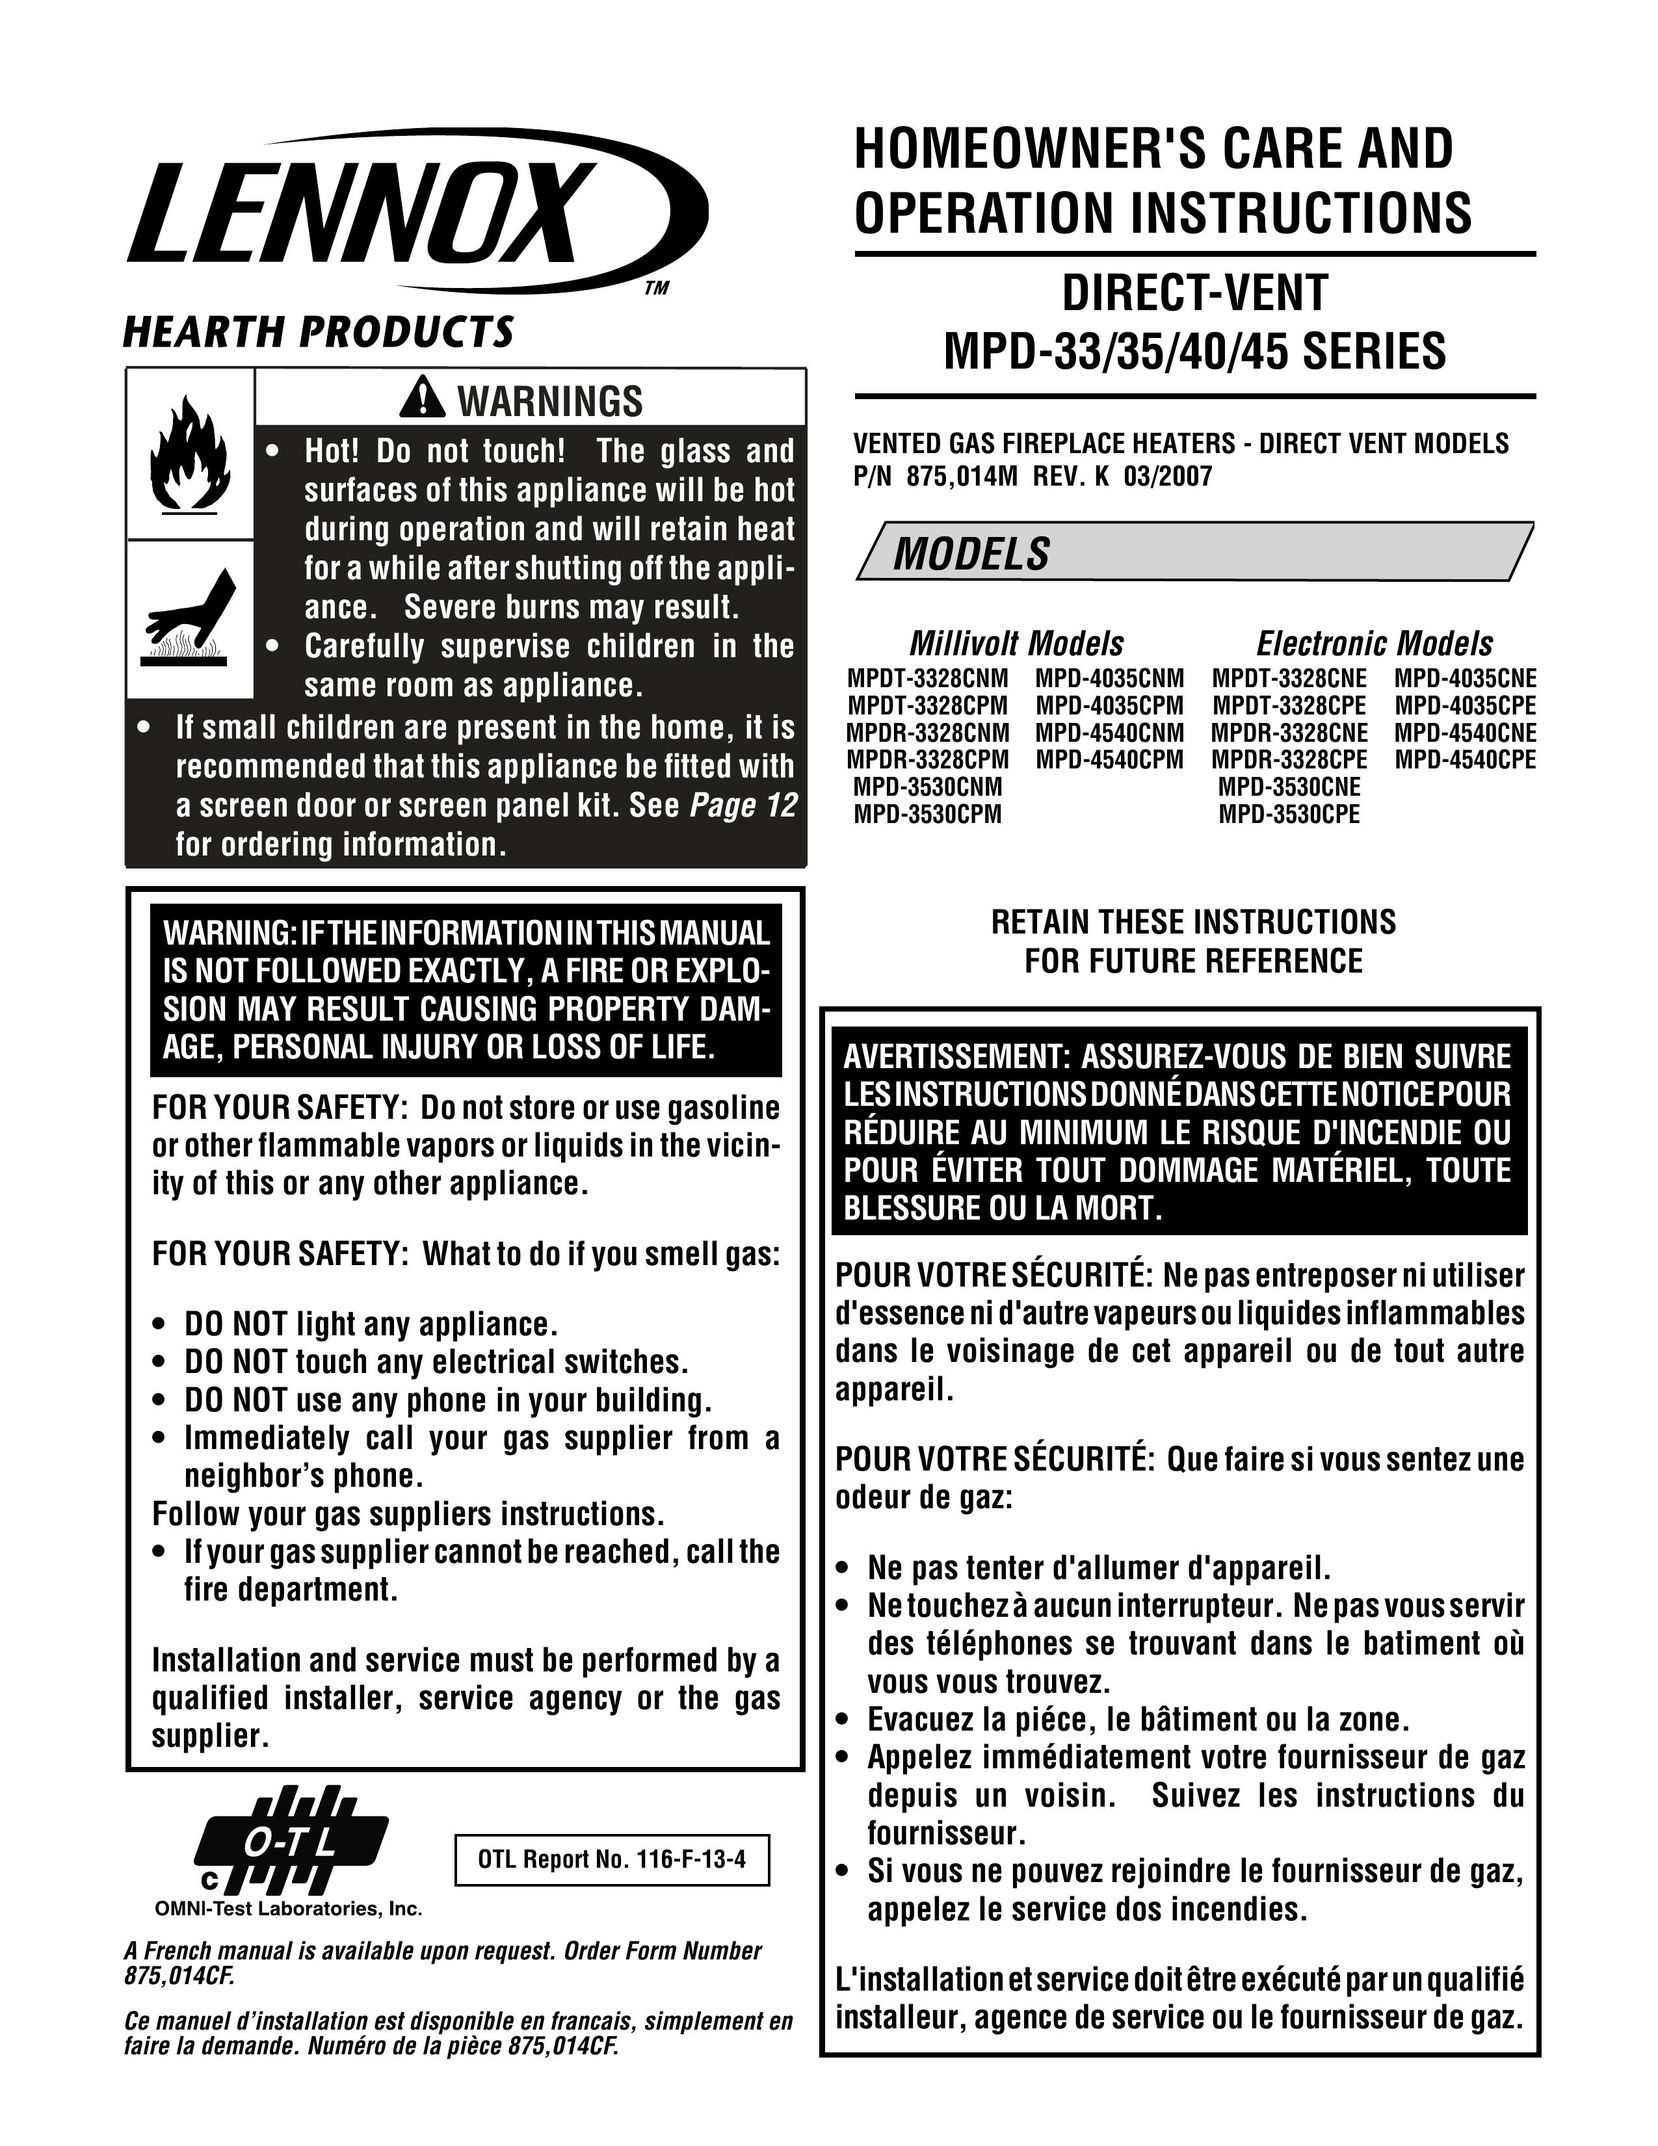 Magnavox MPDR-3328CPE Indoor Fireplace User Manual